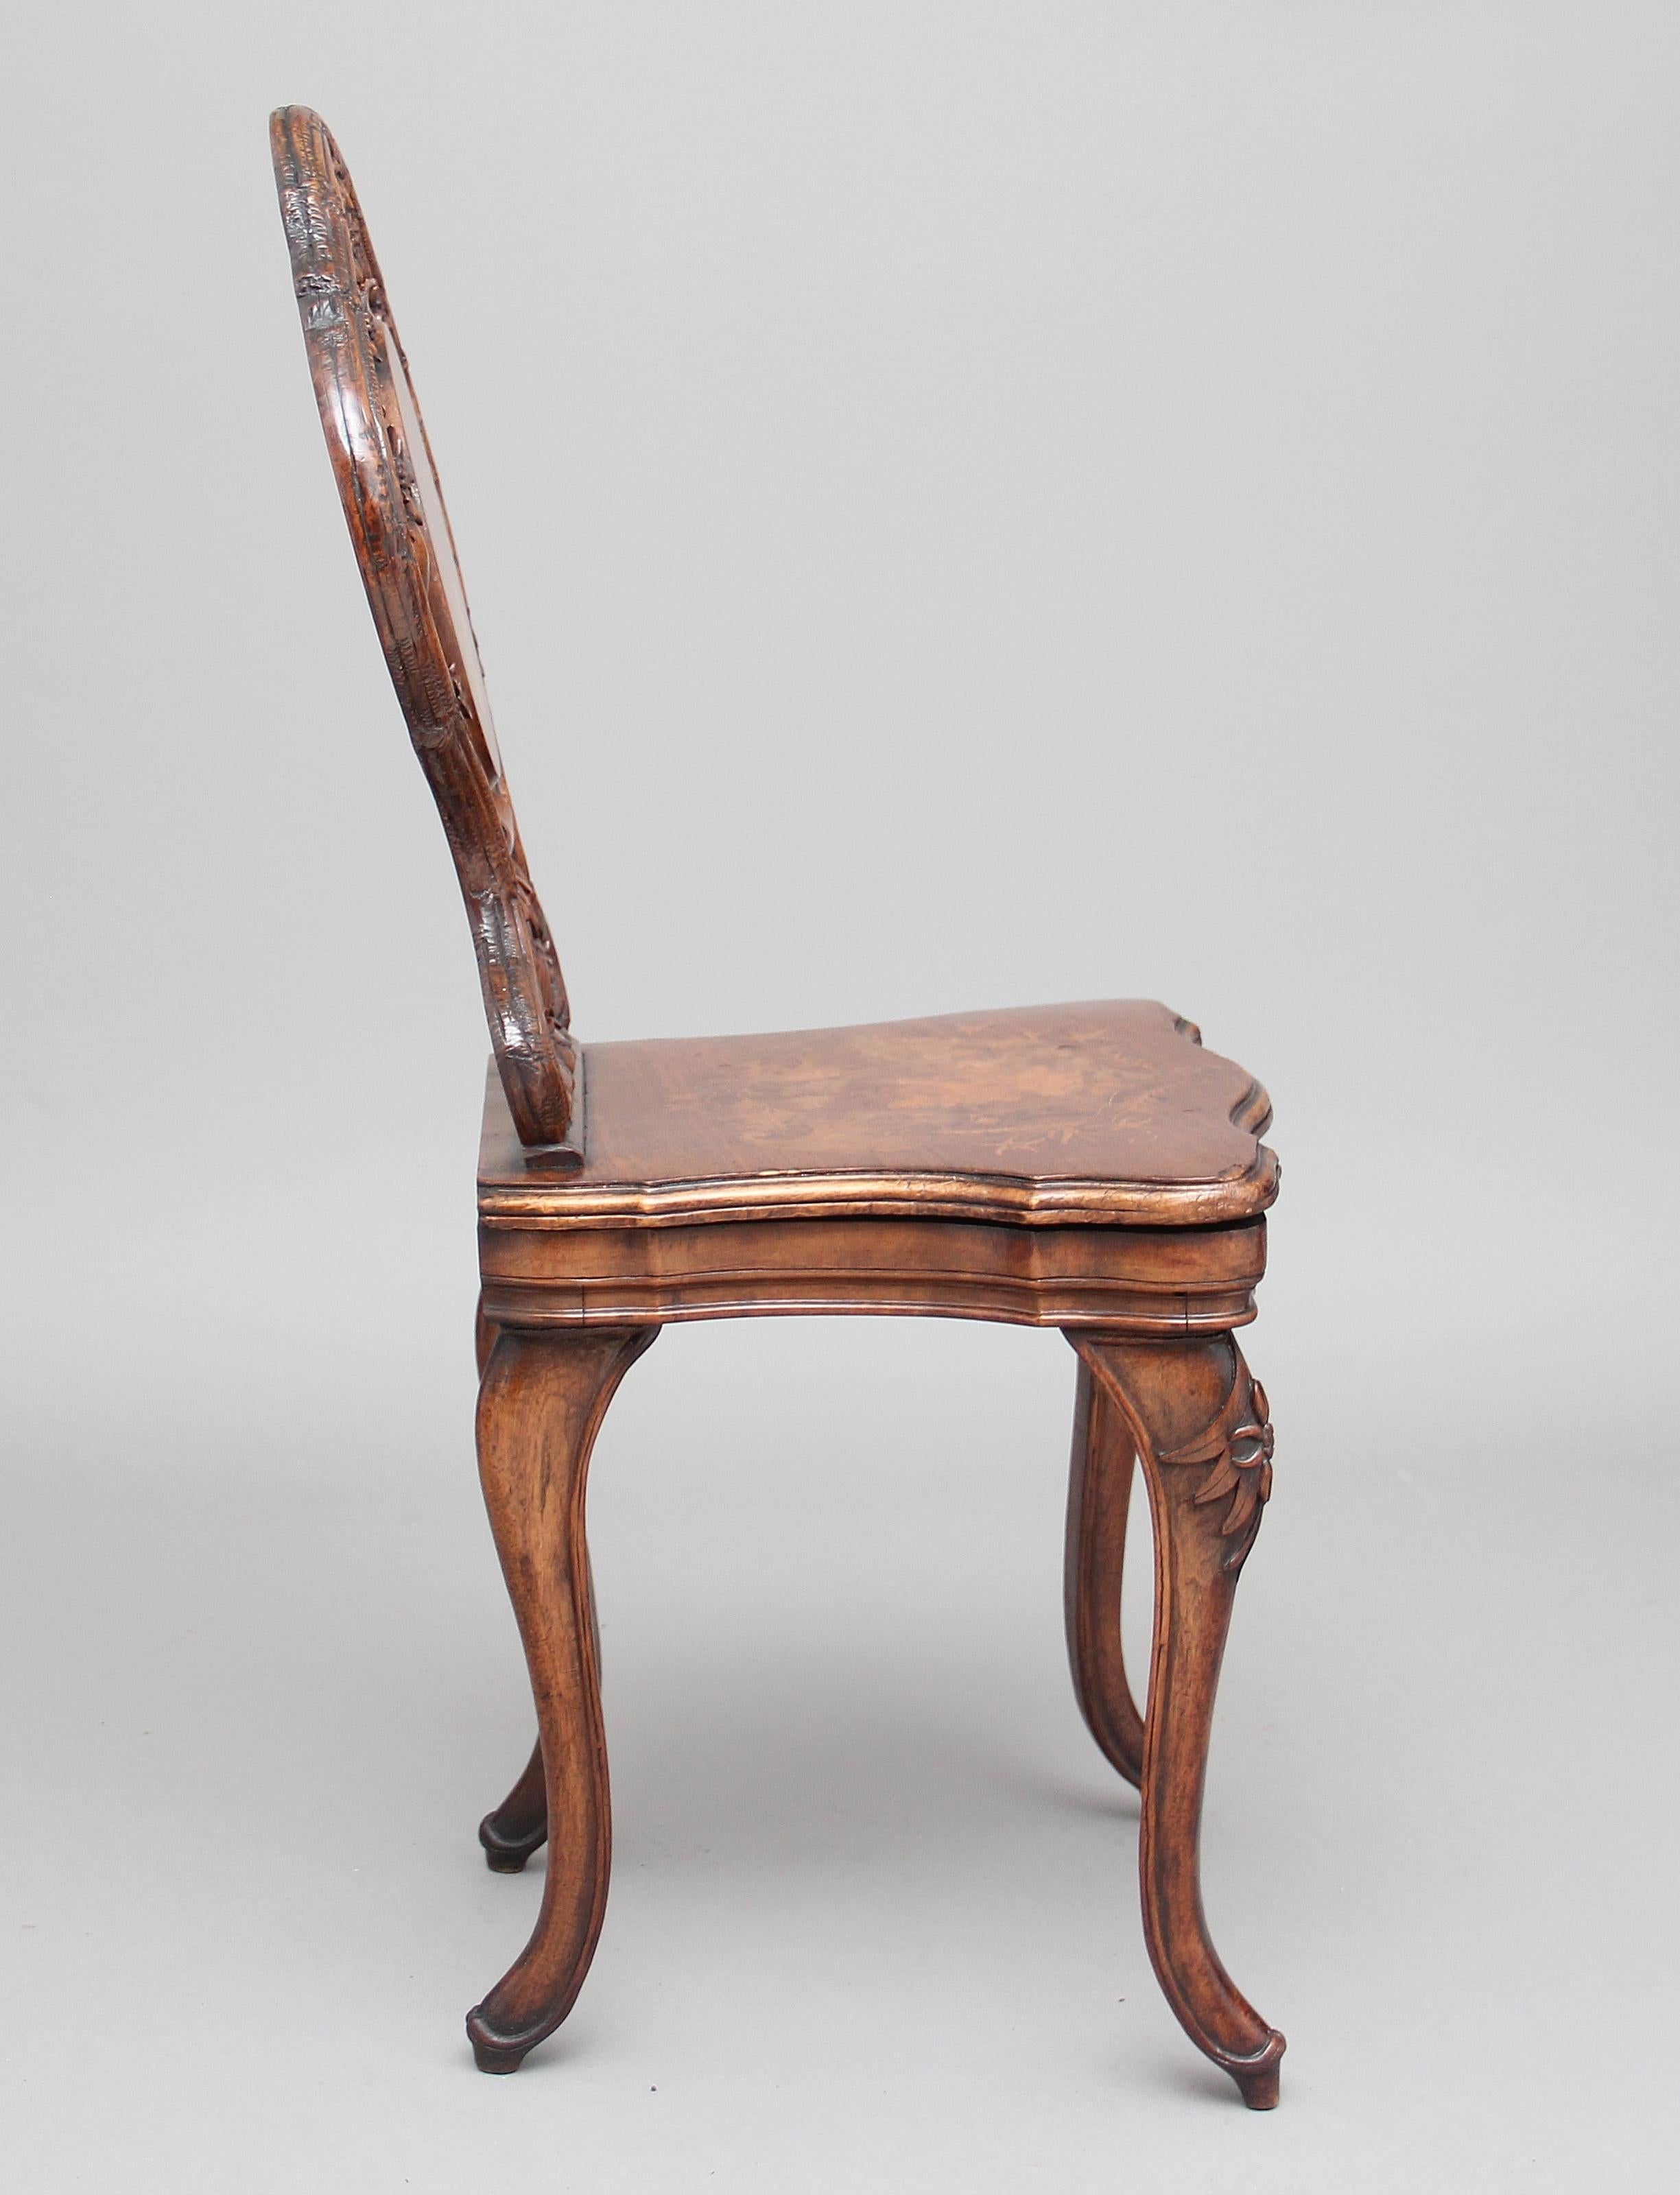 19th century Black Forest musical chair in walnut, the profusely carved back with an inlaid central panel and also an inlaid panel on the seat, depicting typical Swiss scenes, standing on four carved swept legs, circa 1890.
 